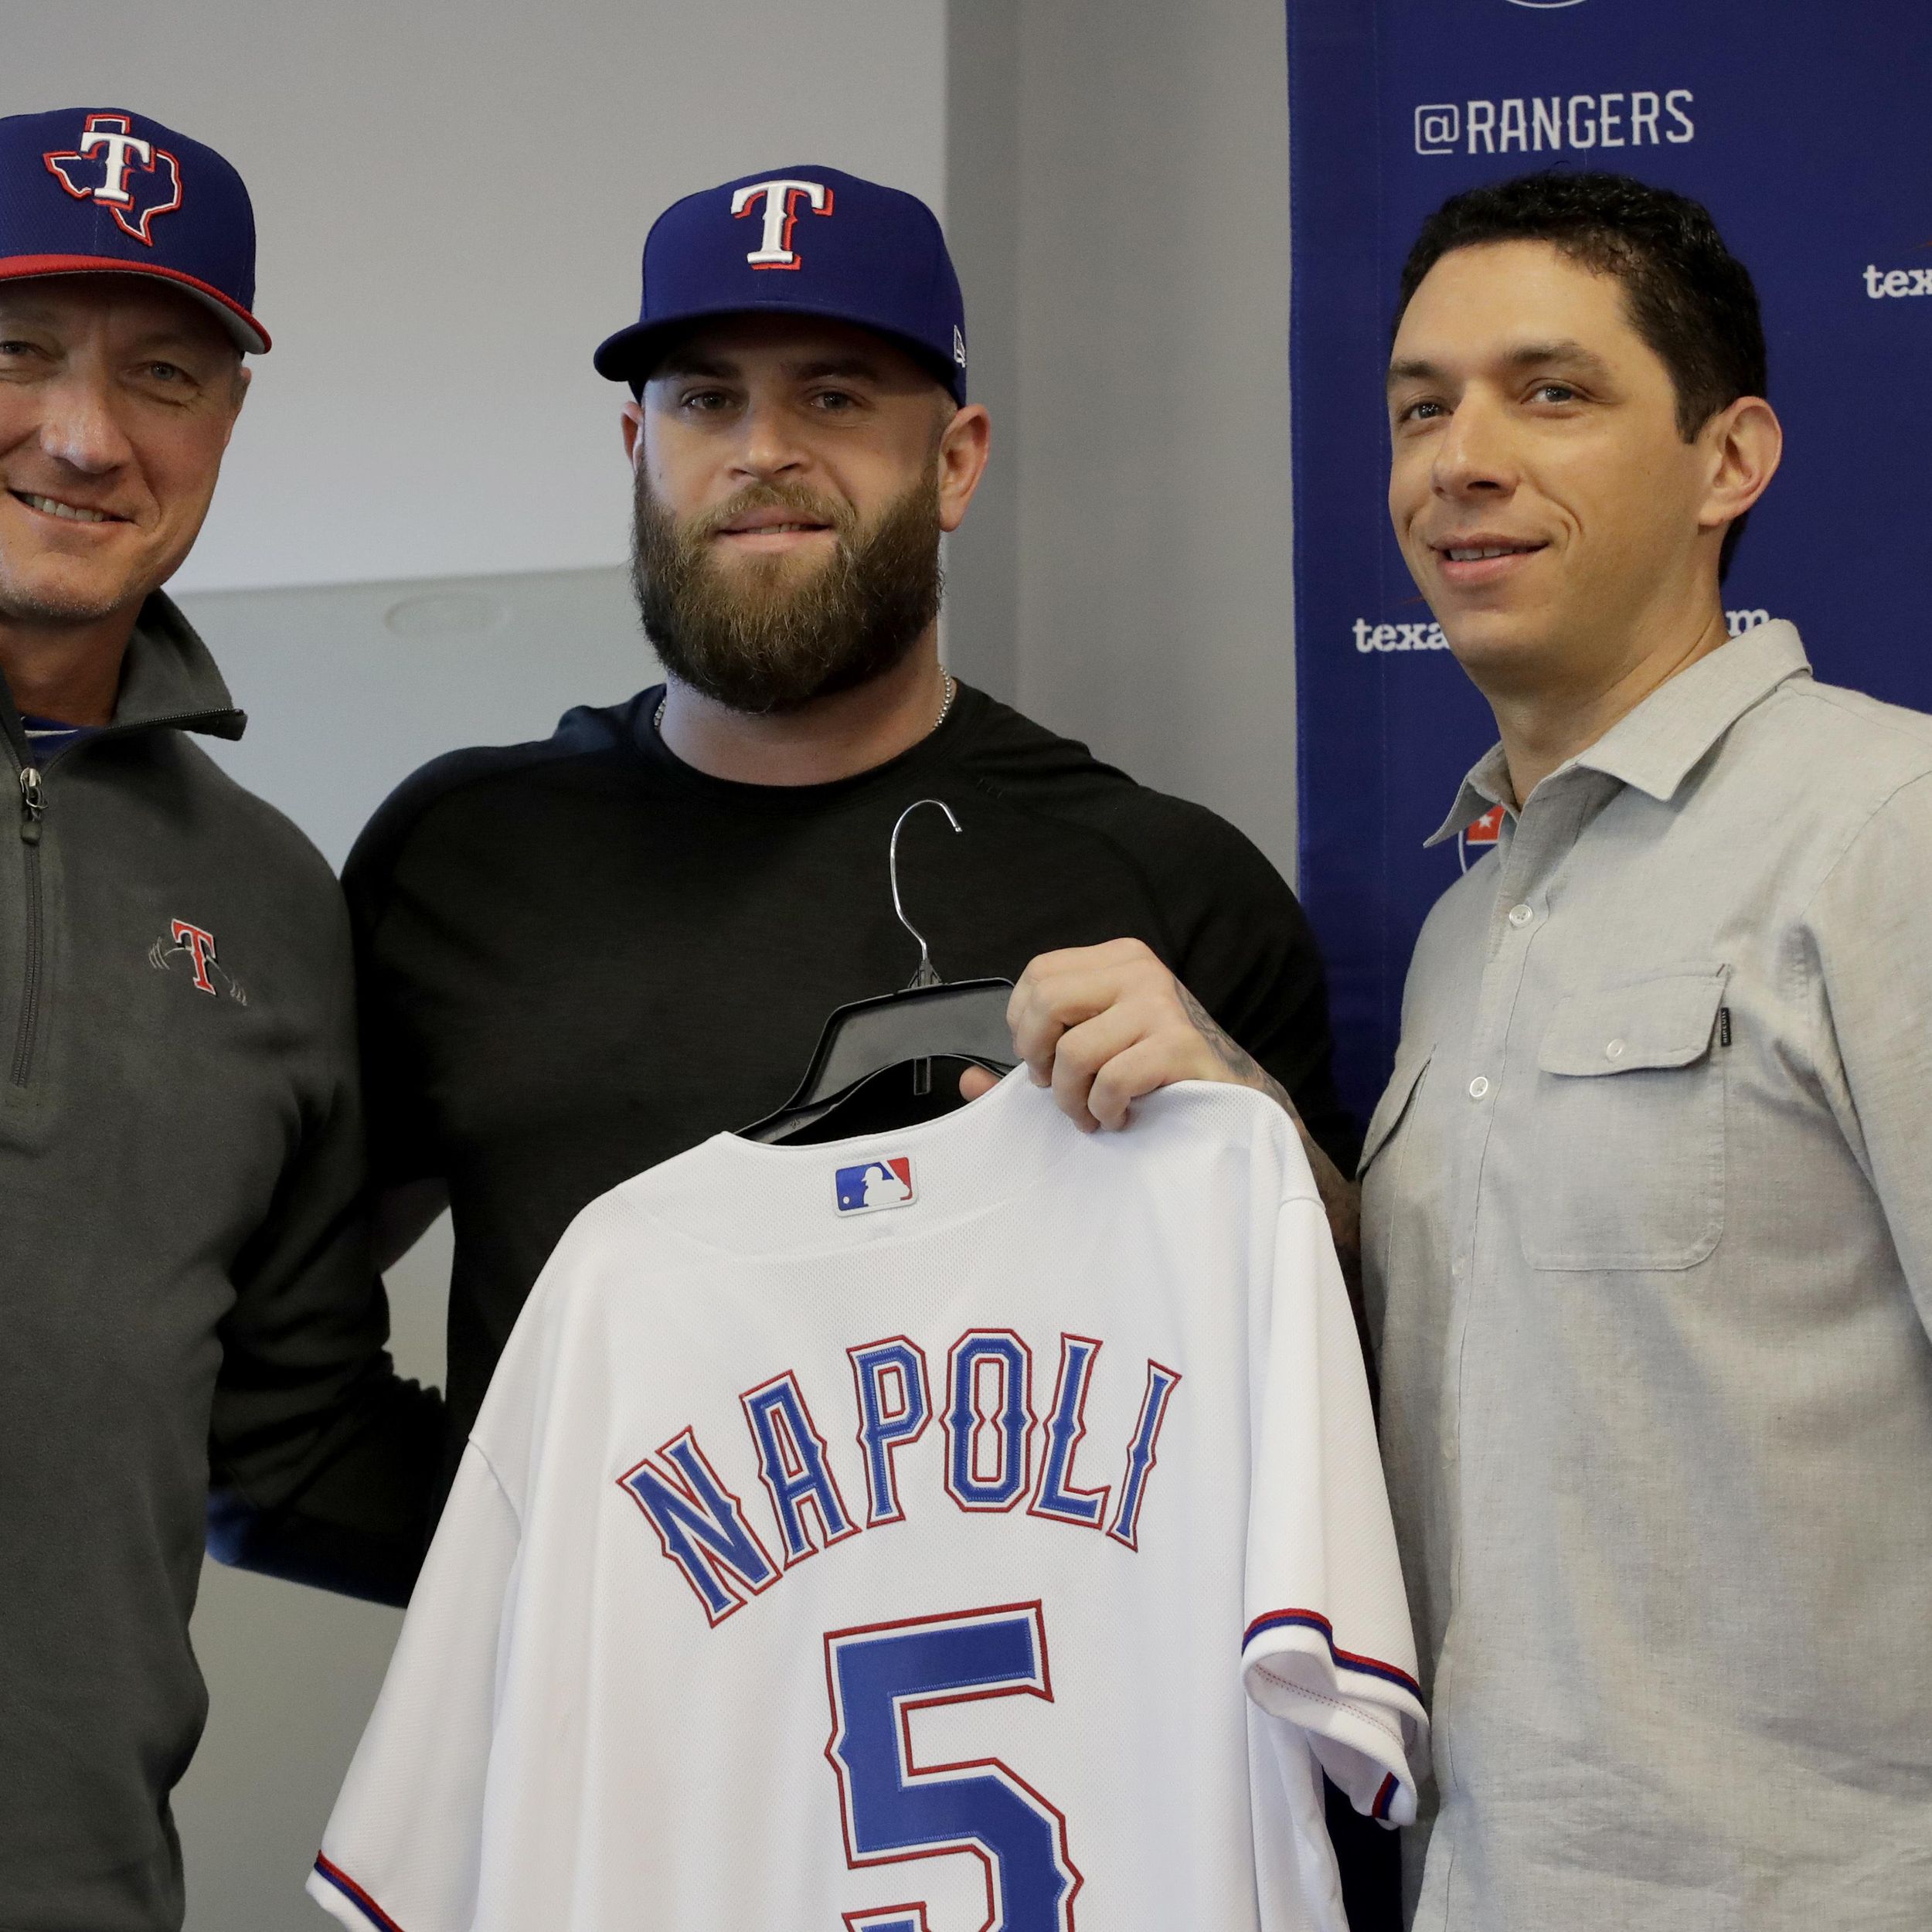 Cleveland Indians sign Mike Napoli to one-year deal - Sports